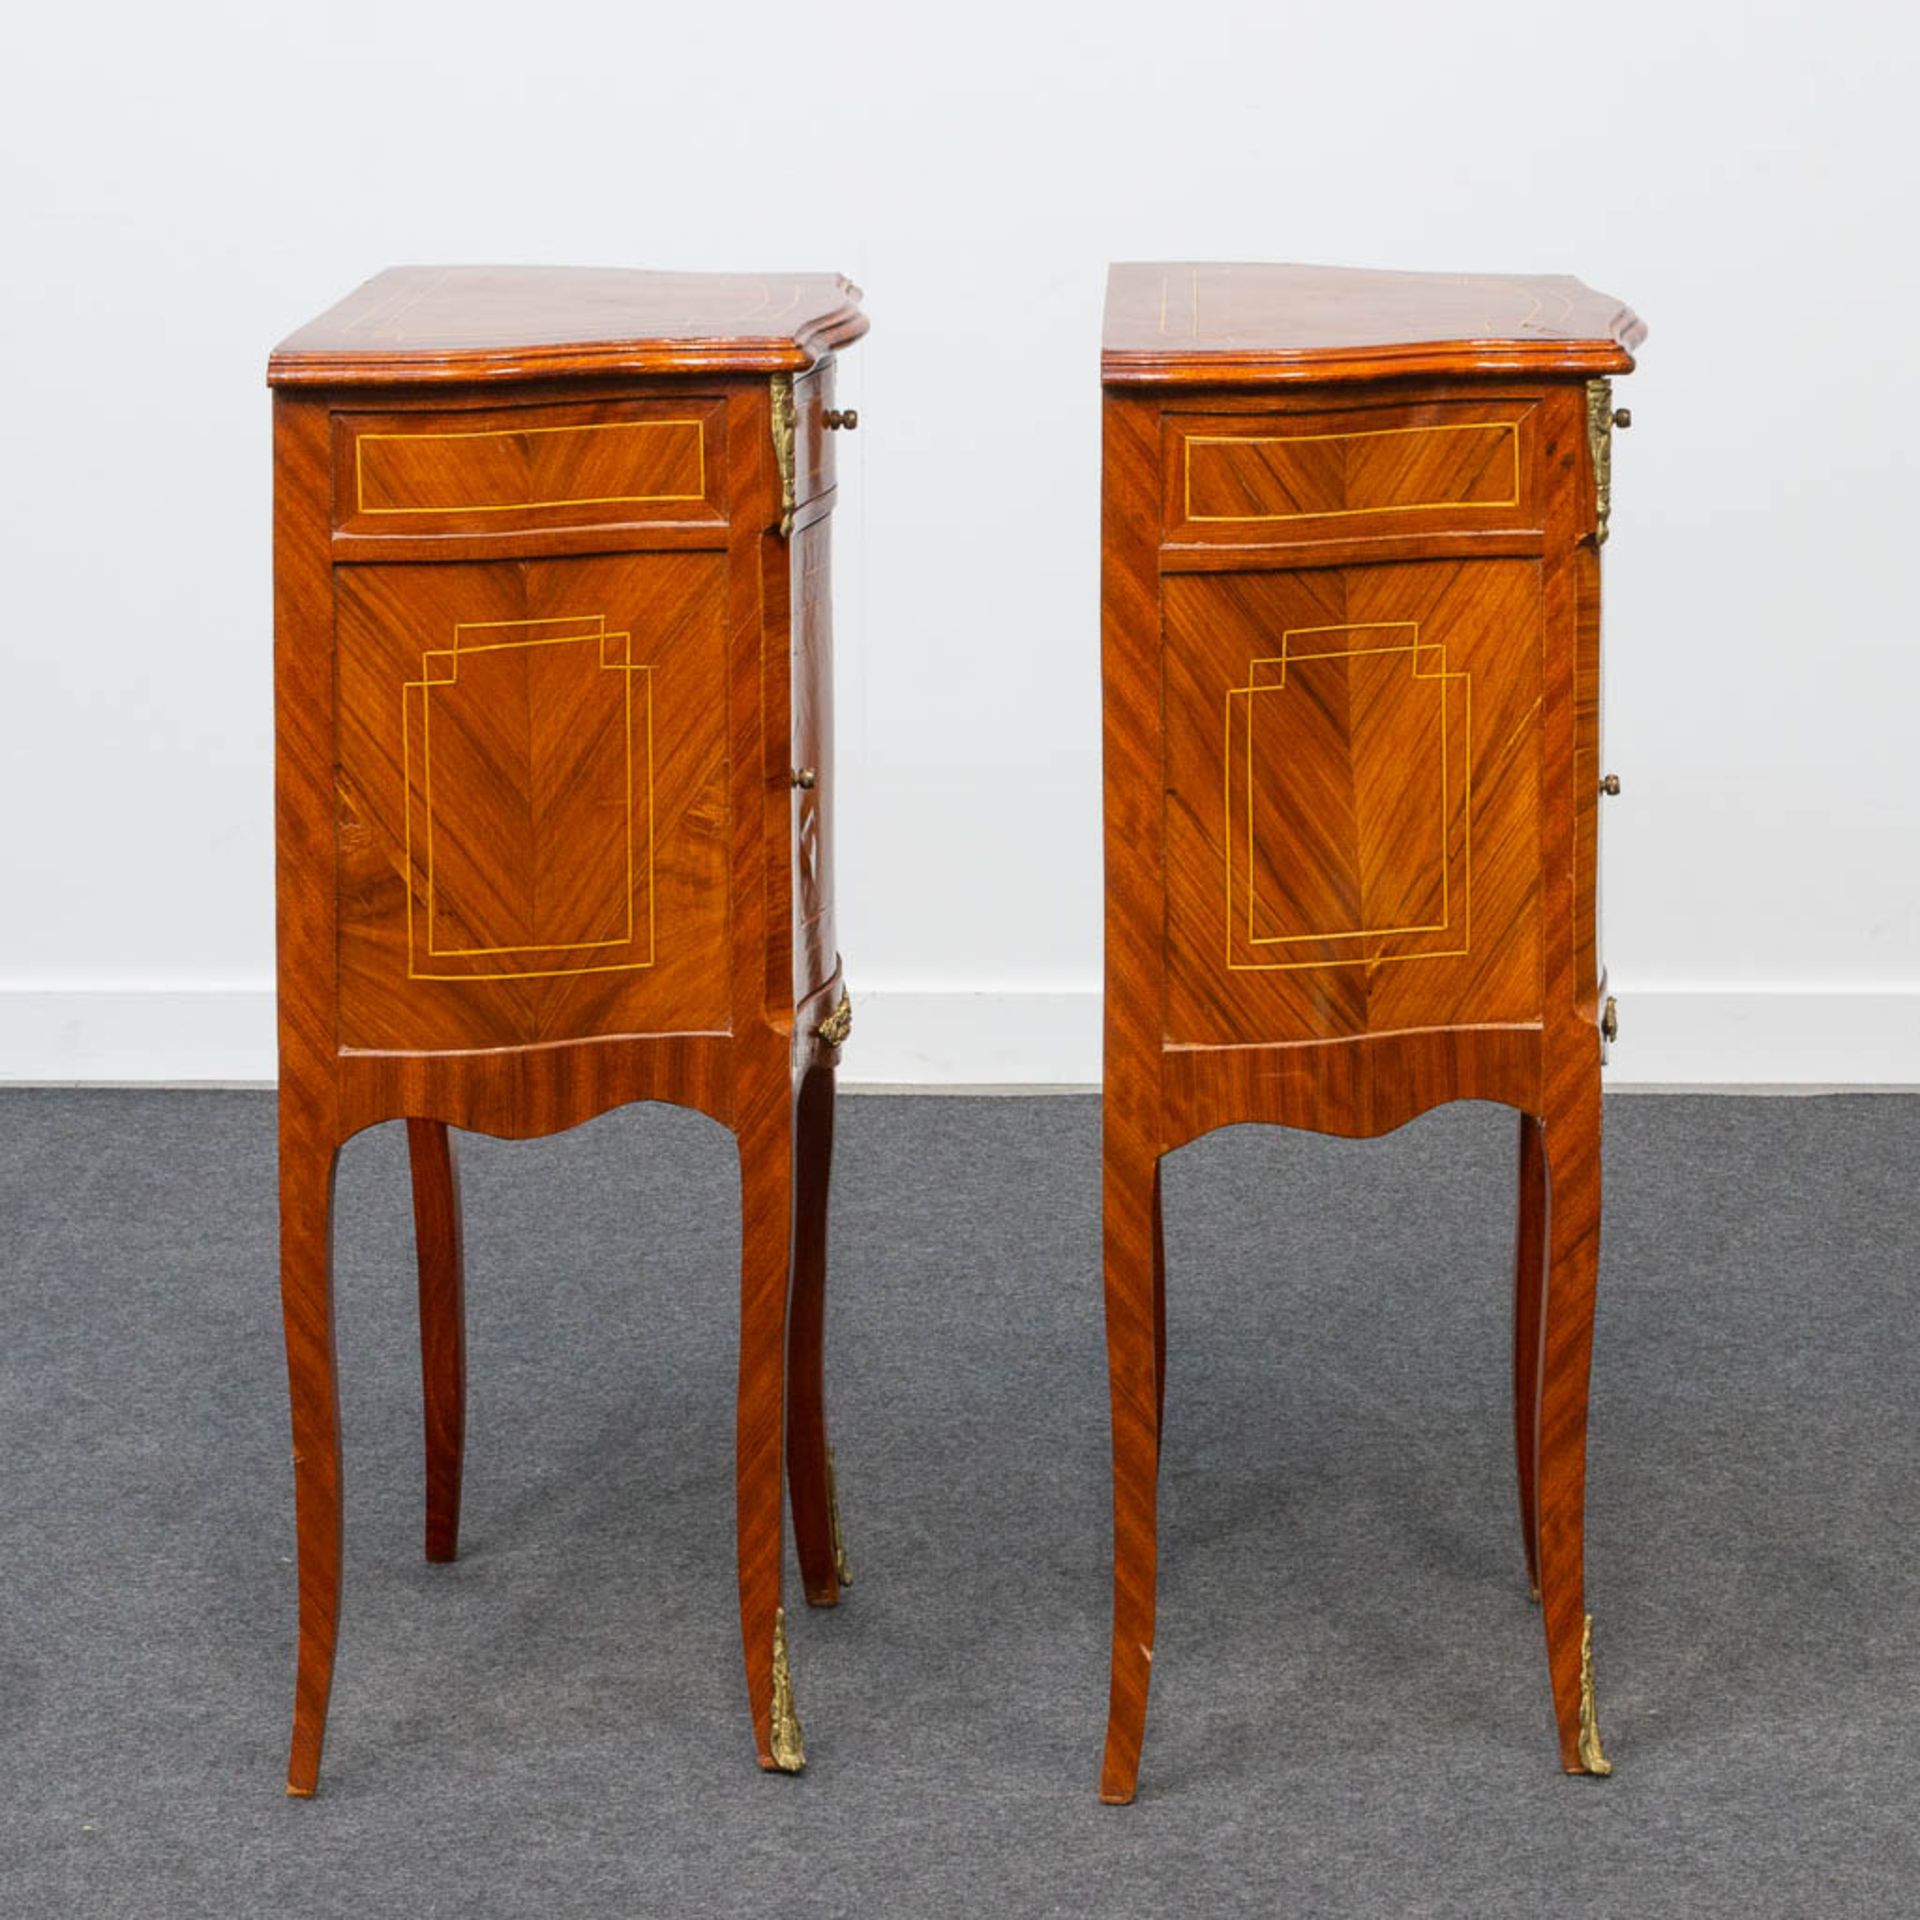 A pair of bronze mounted nightstands, inlaid with marquetry. Second half of the 20th century. - Image 13 of 22